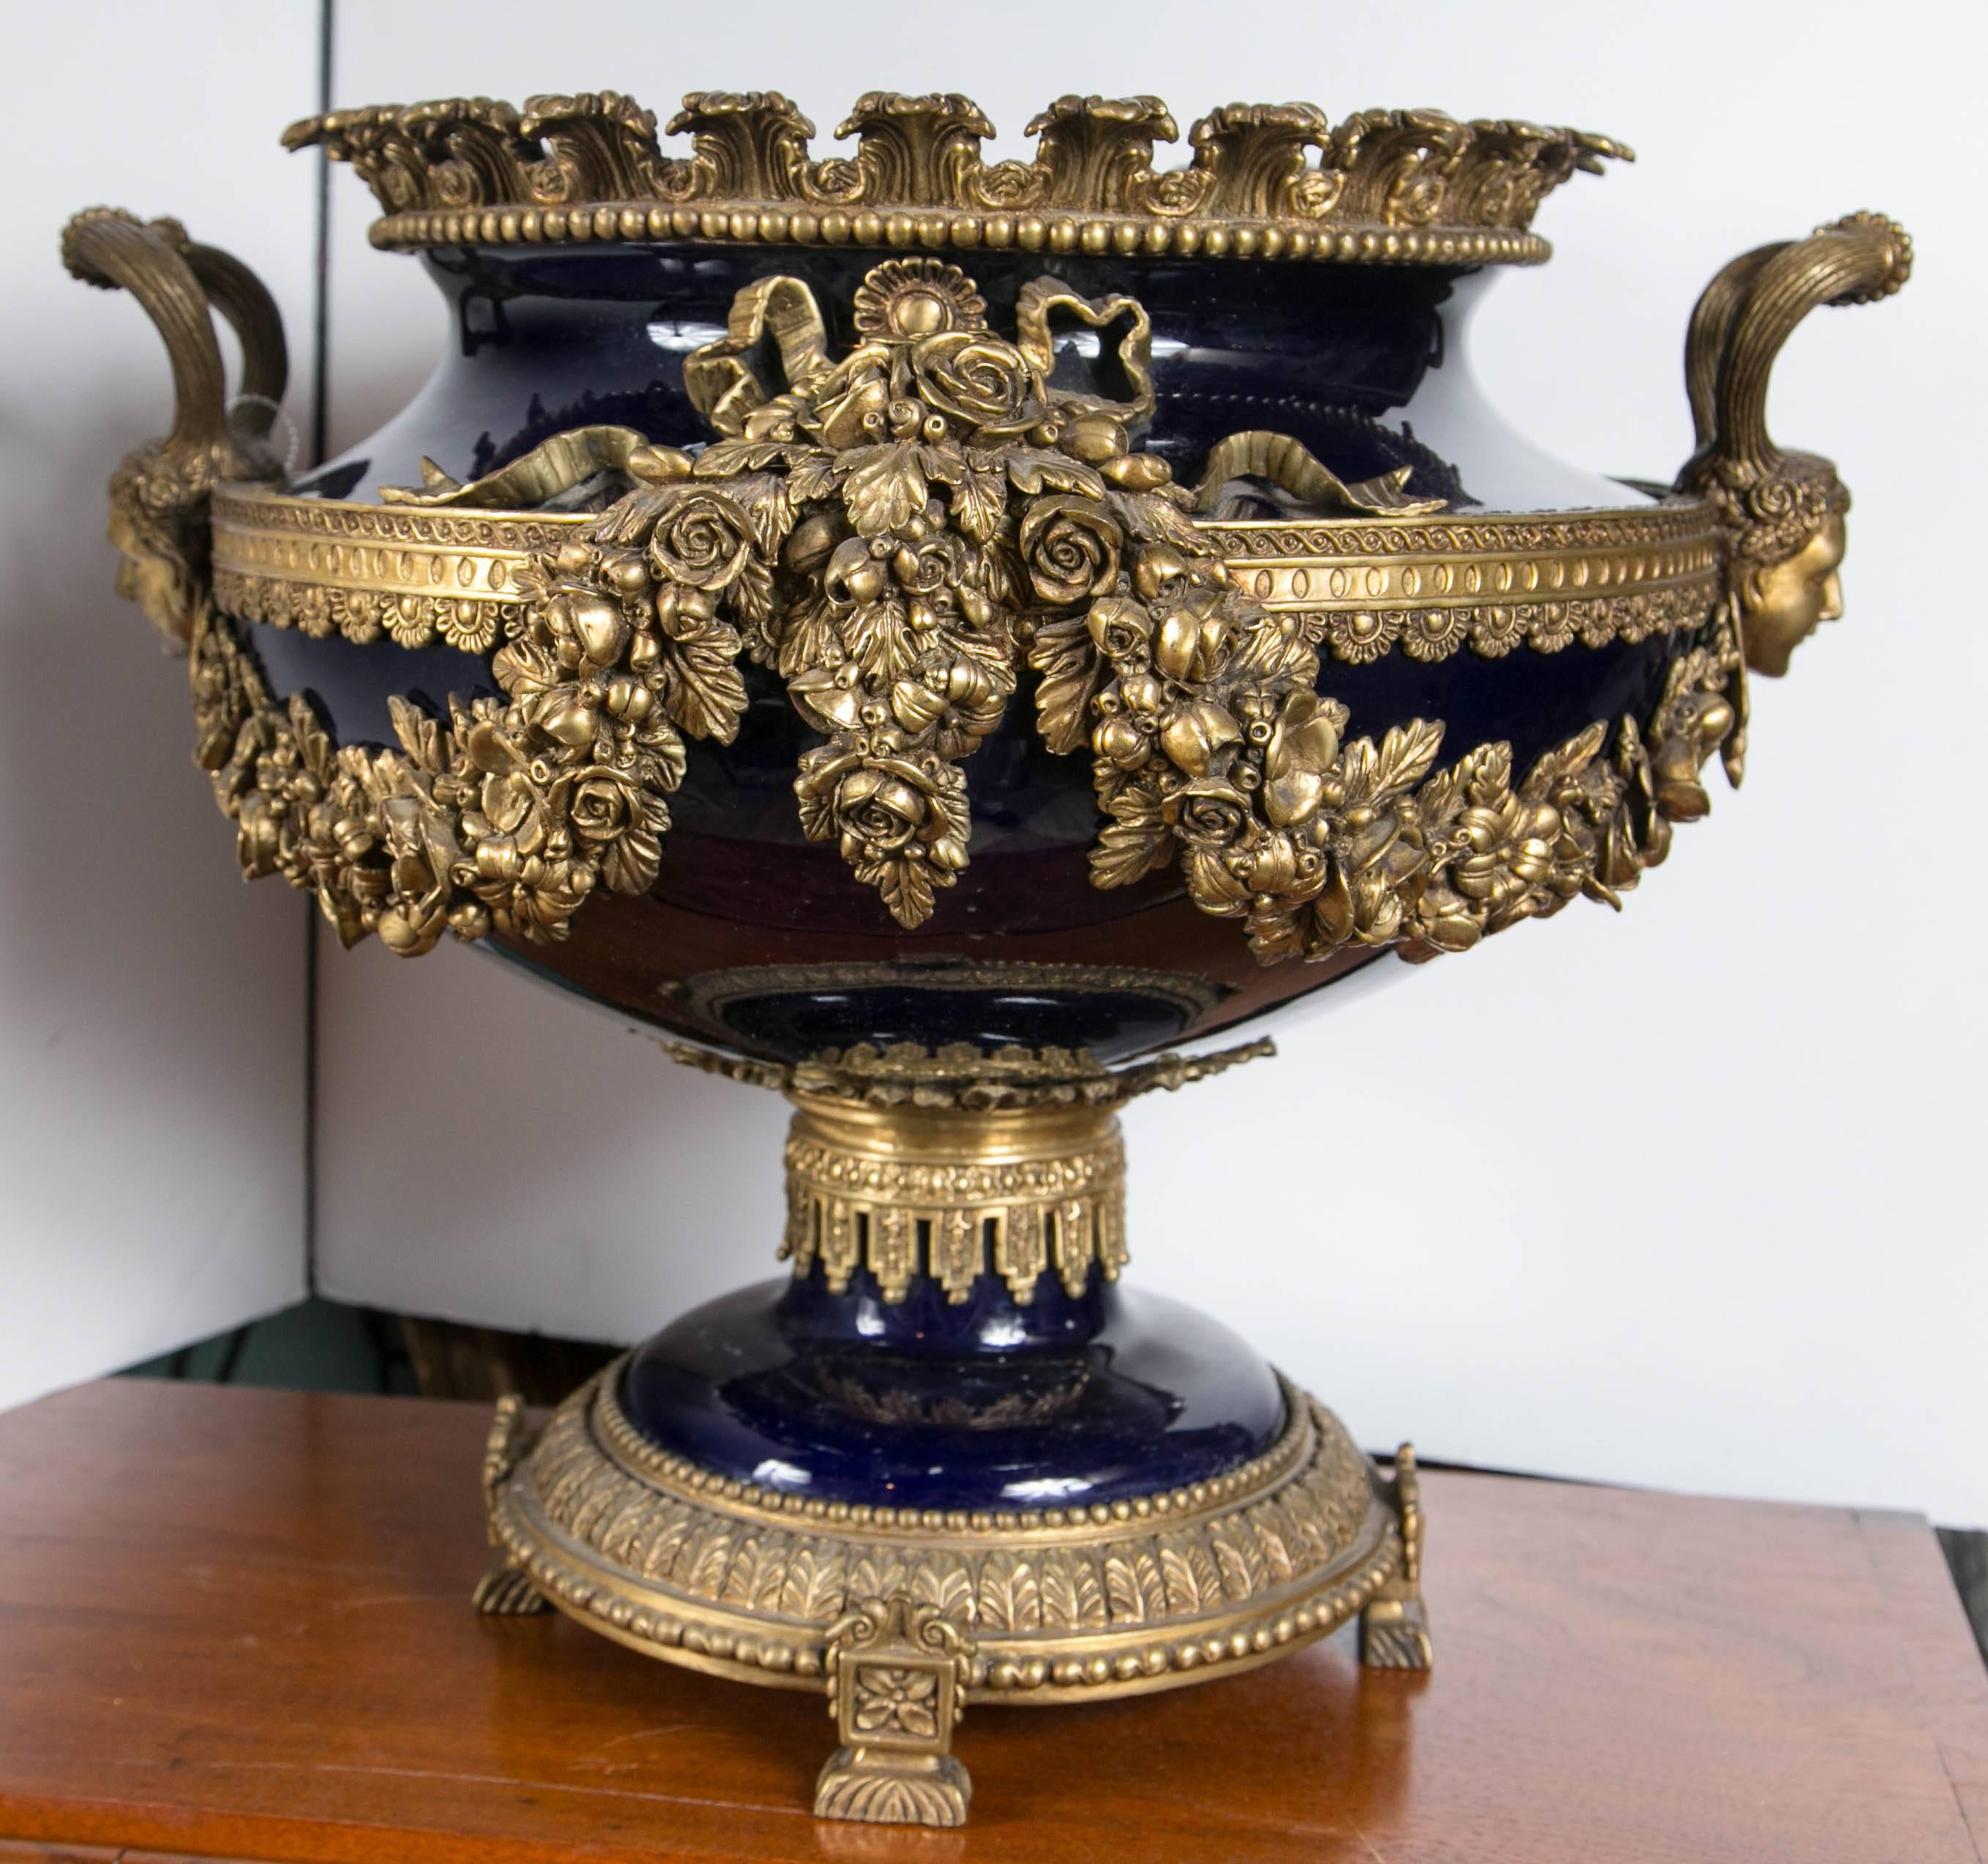 Dramatic urn form center piece with bronze mounts and handles. Faces oon the handles and swags of floral garlands.

shipping cost is an approximate.